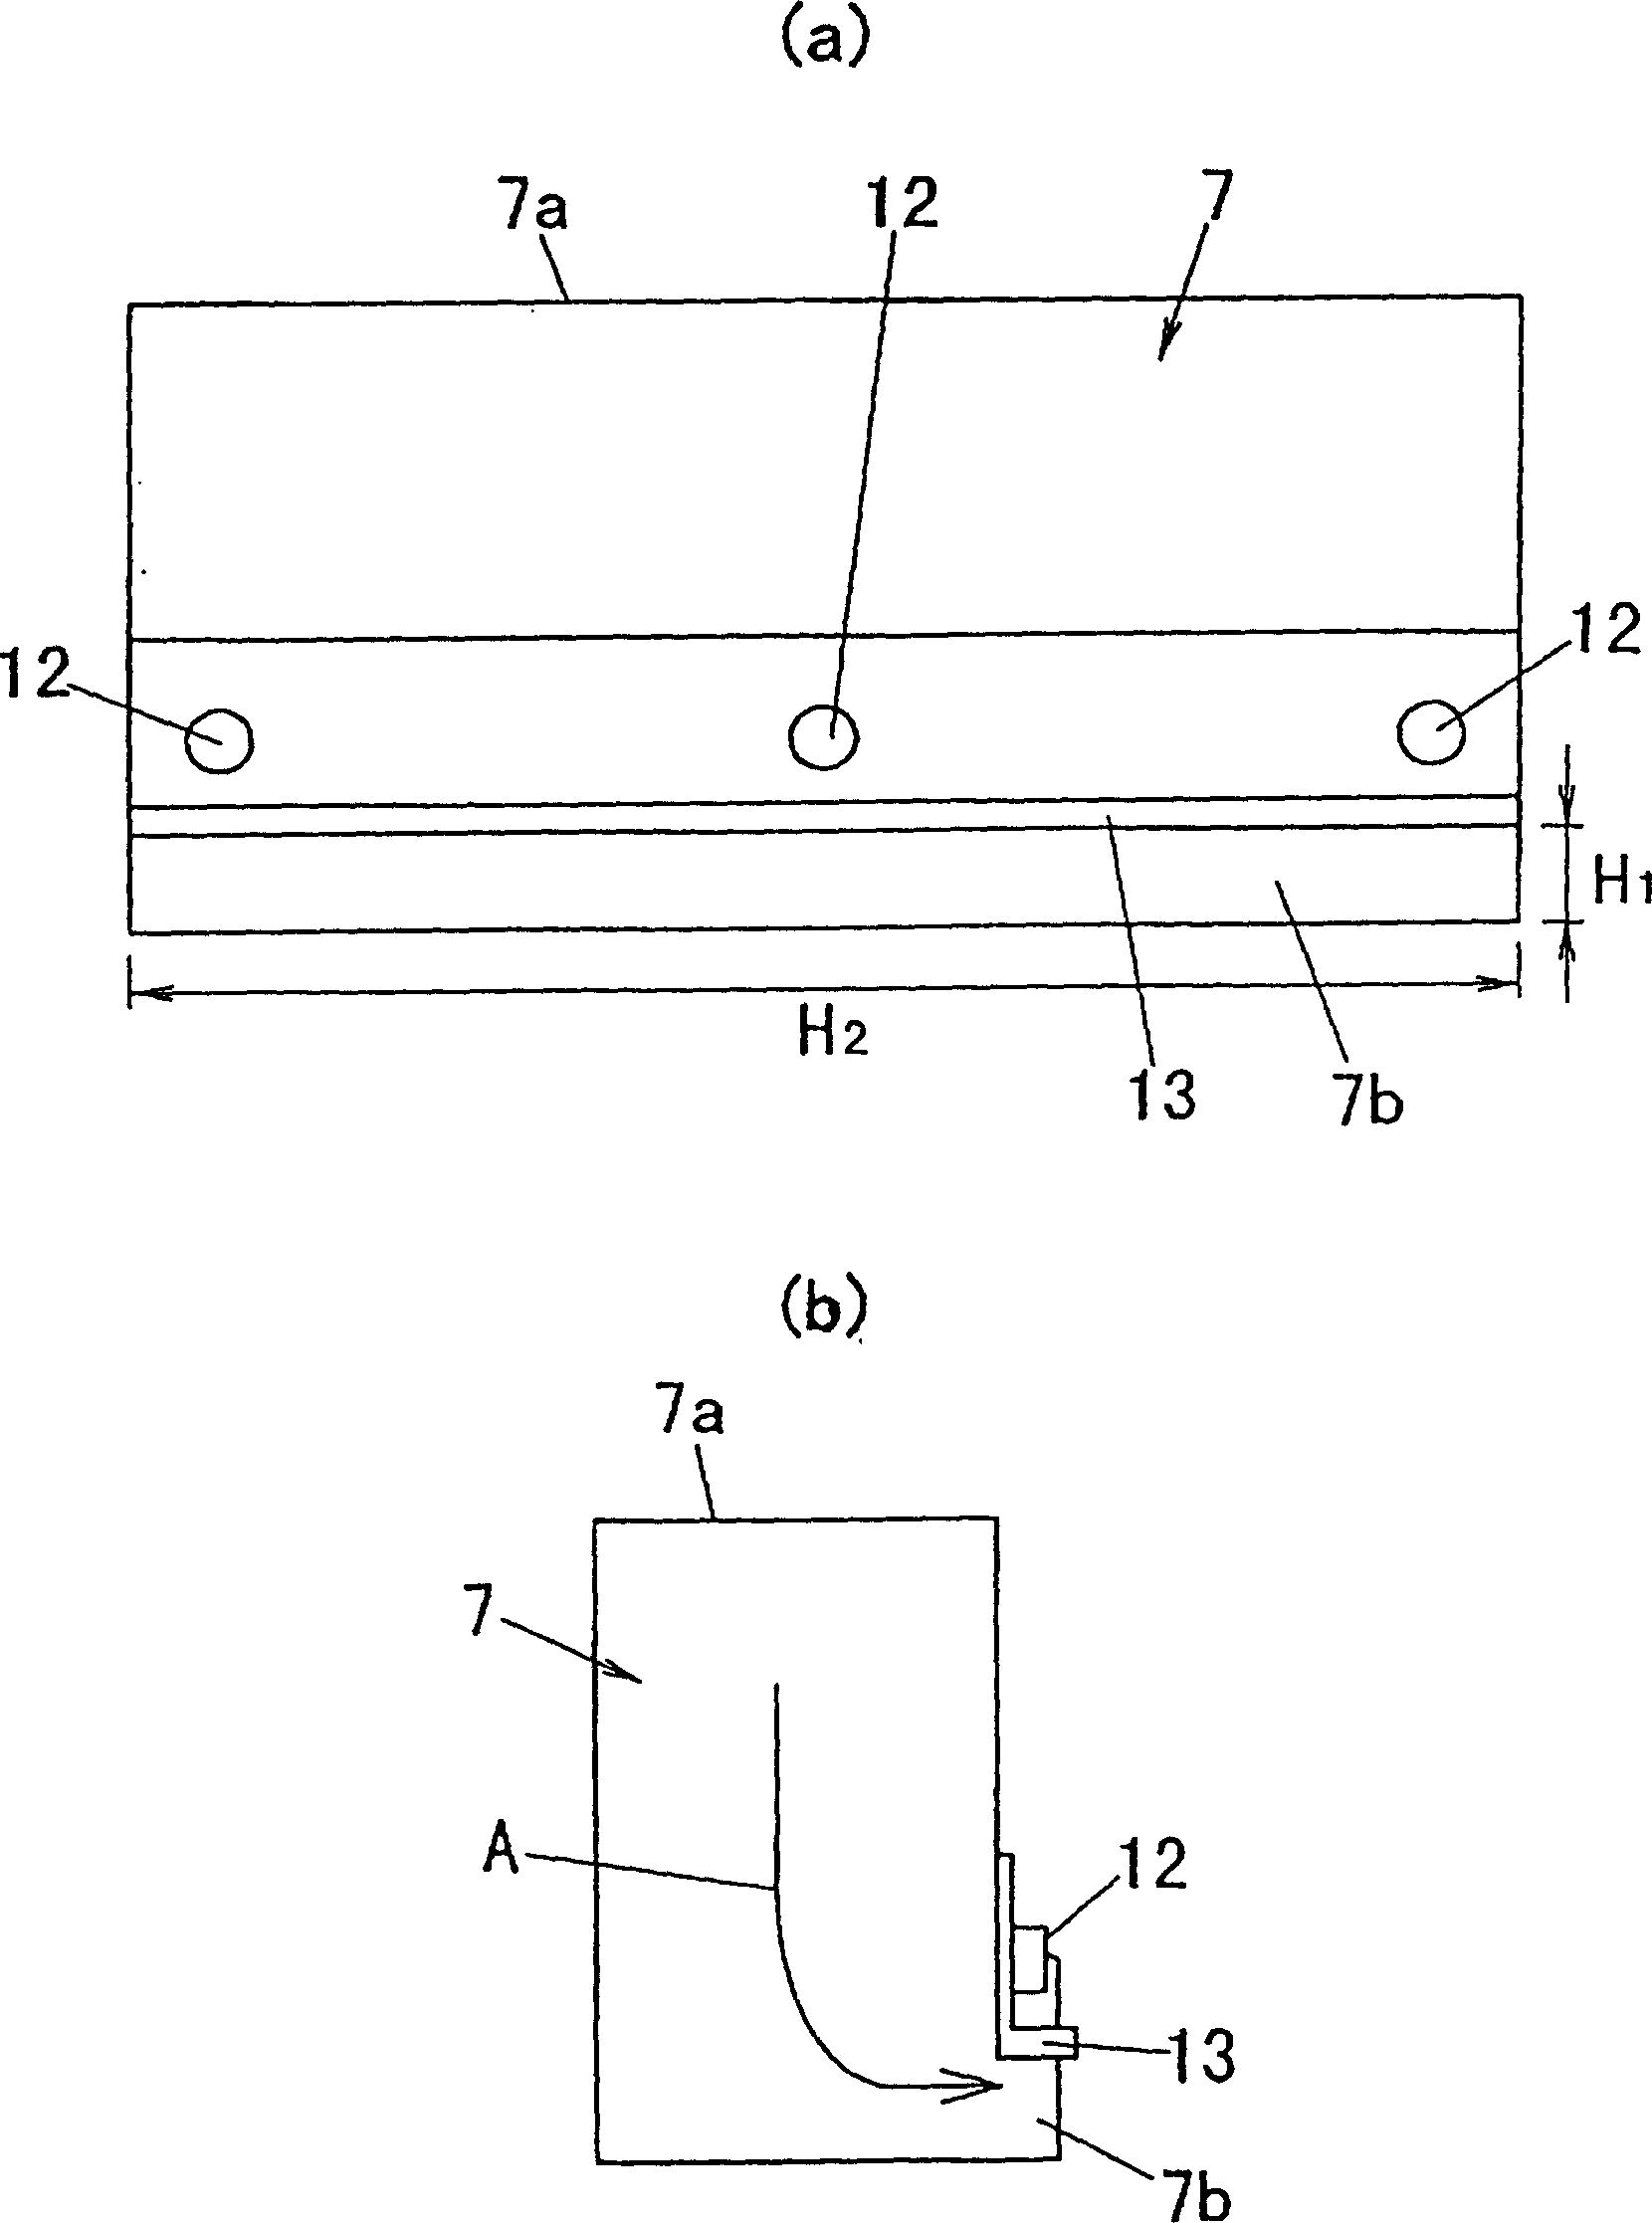 Method for making cement fibre board